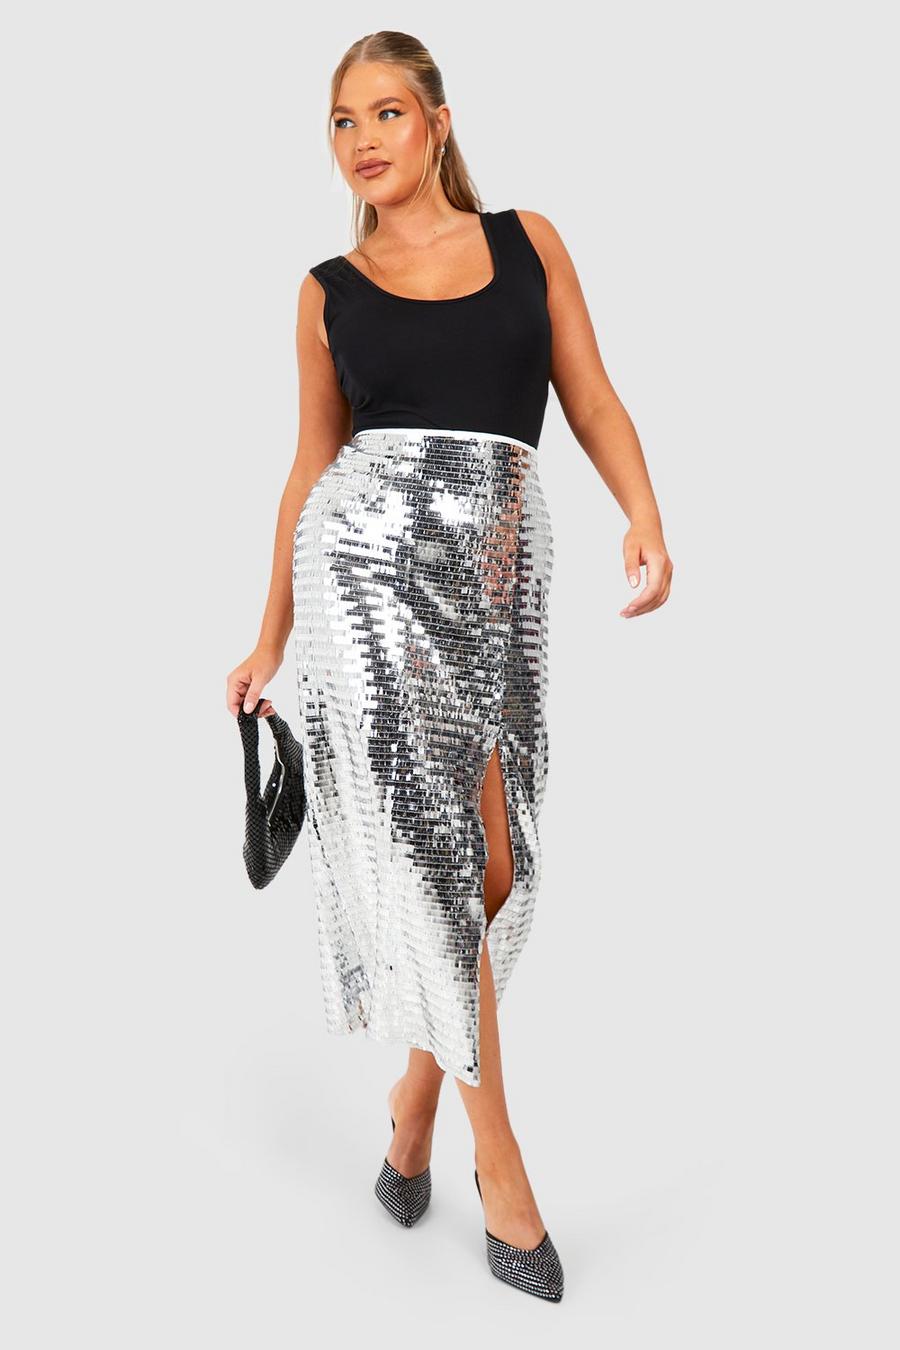 Sequin Skirts, Sparkly Skirts